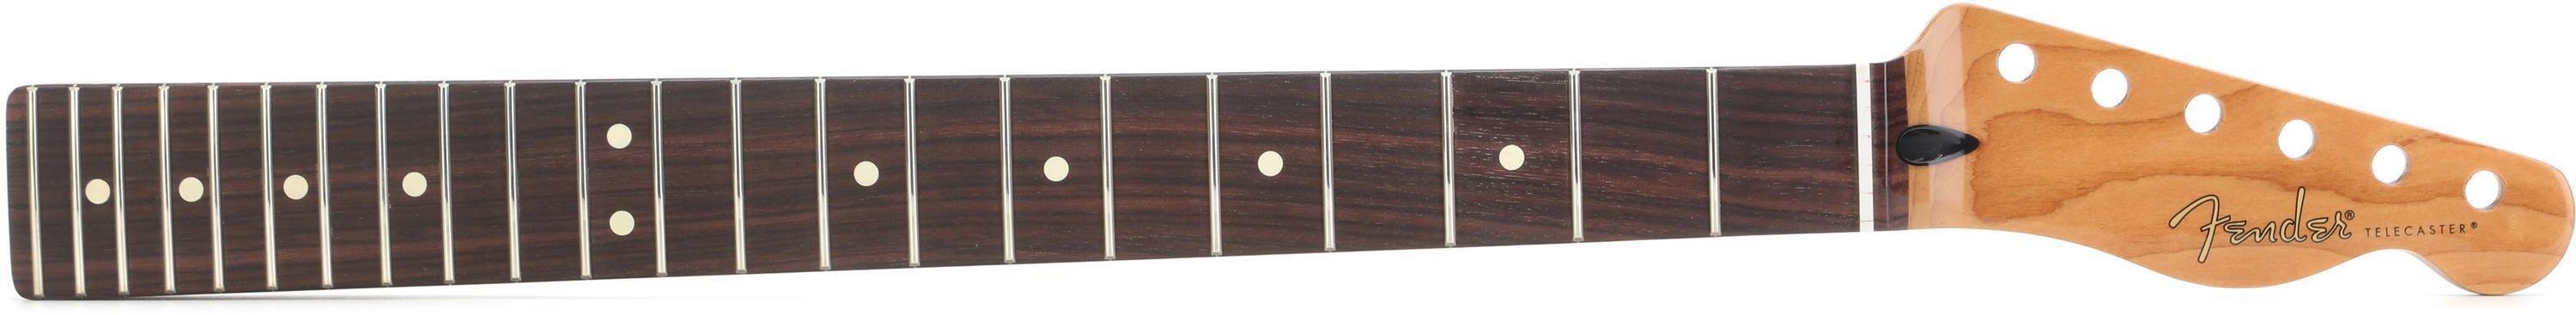 Fender Satin Roasted Maple Telecaster Replacement Neck - Rosewood 